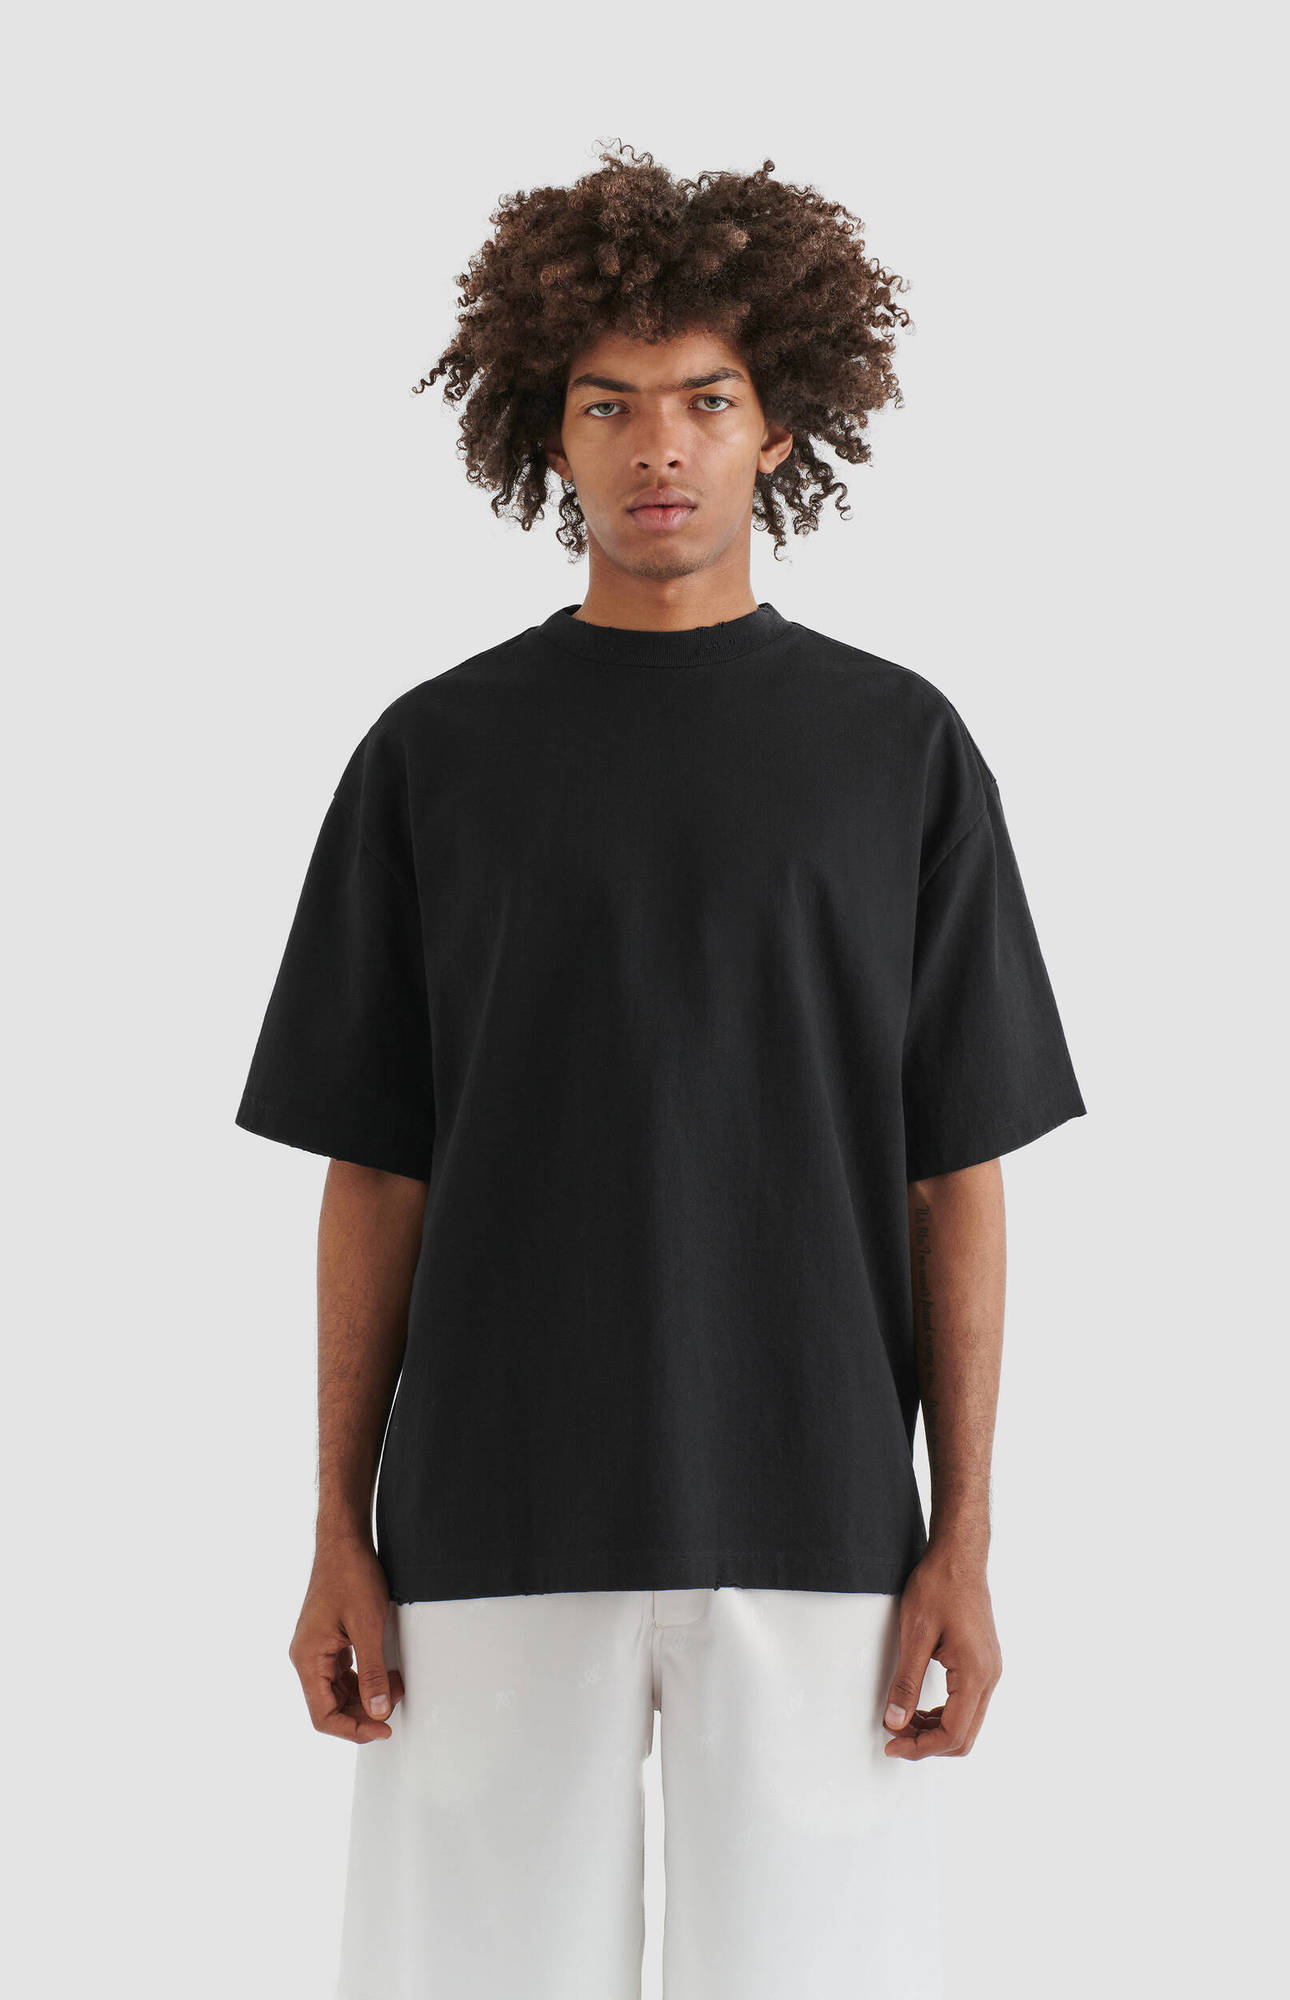 AXEL ARIGATO Series Distressed T-Shirt Backprinted in Black S